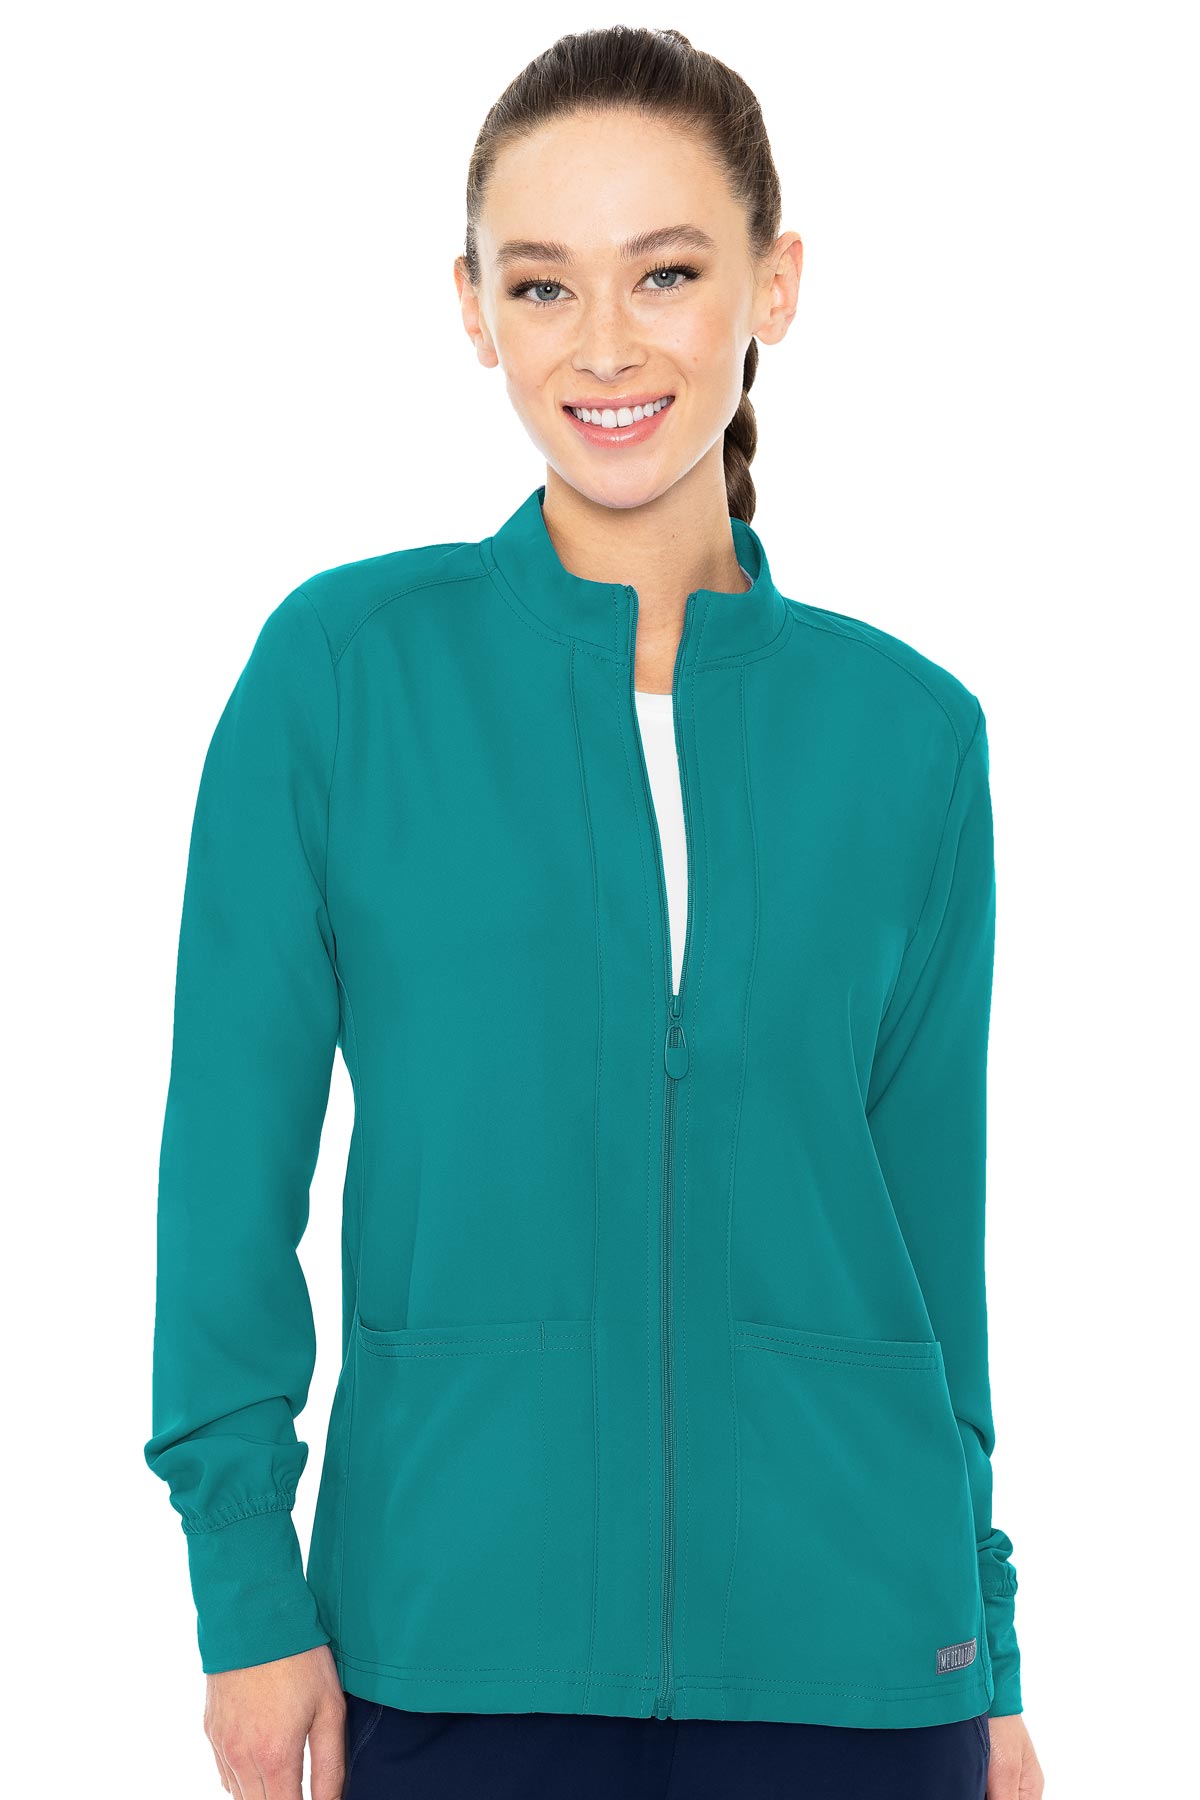 Med Couture Teal Blue WARM